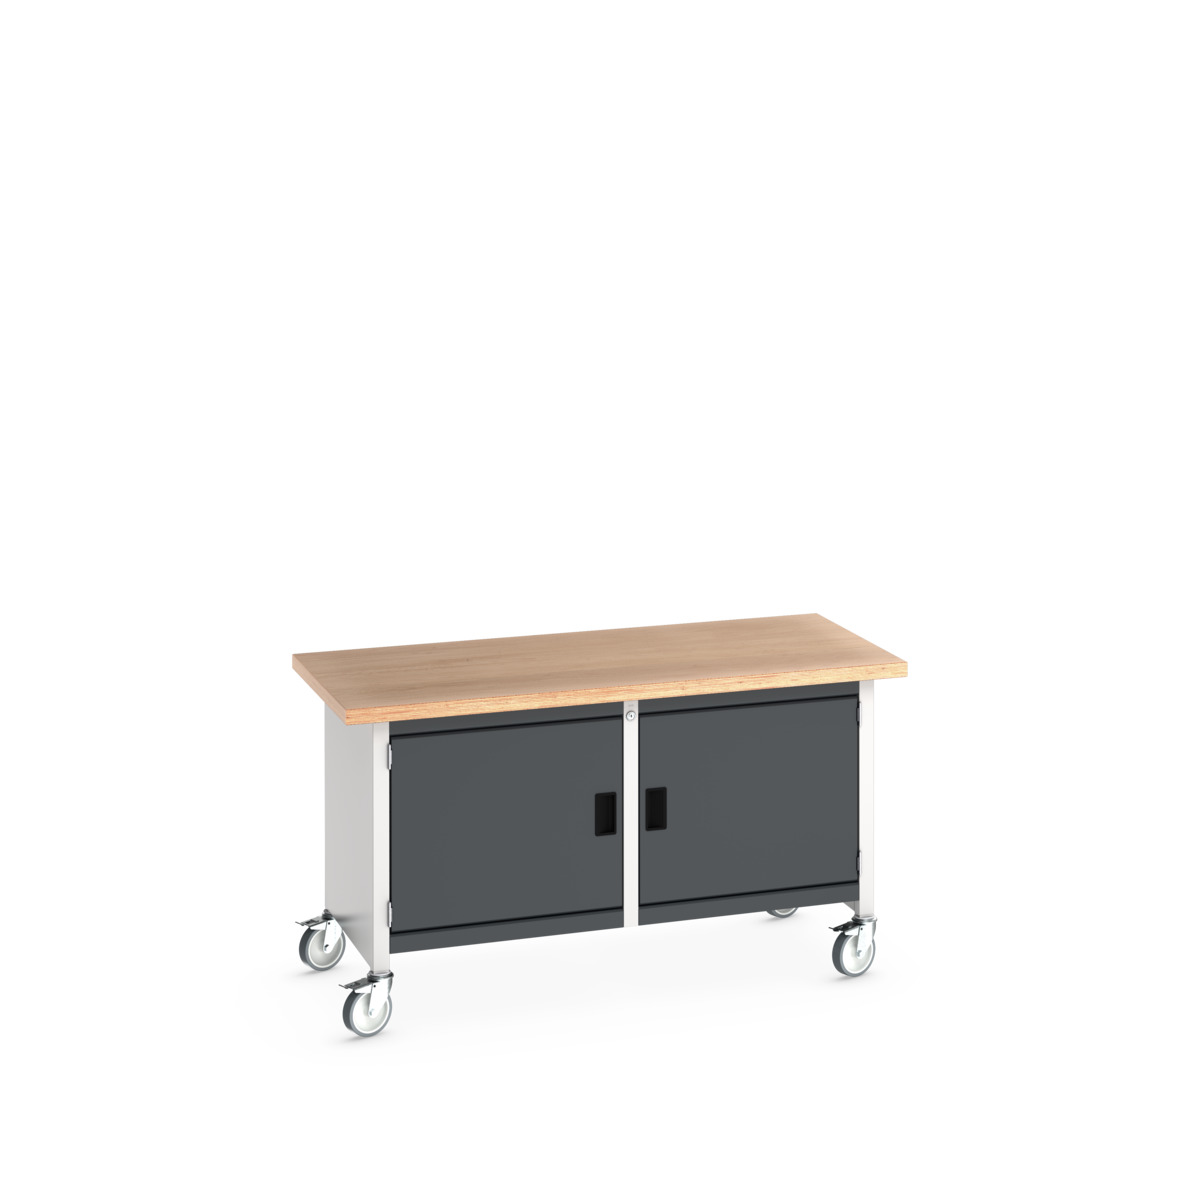 41002097.19V - cubio mobile storage bench (mpx)